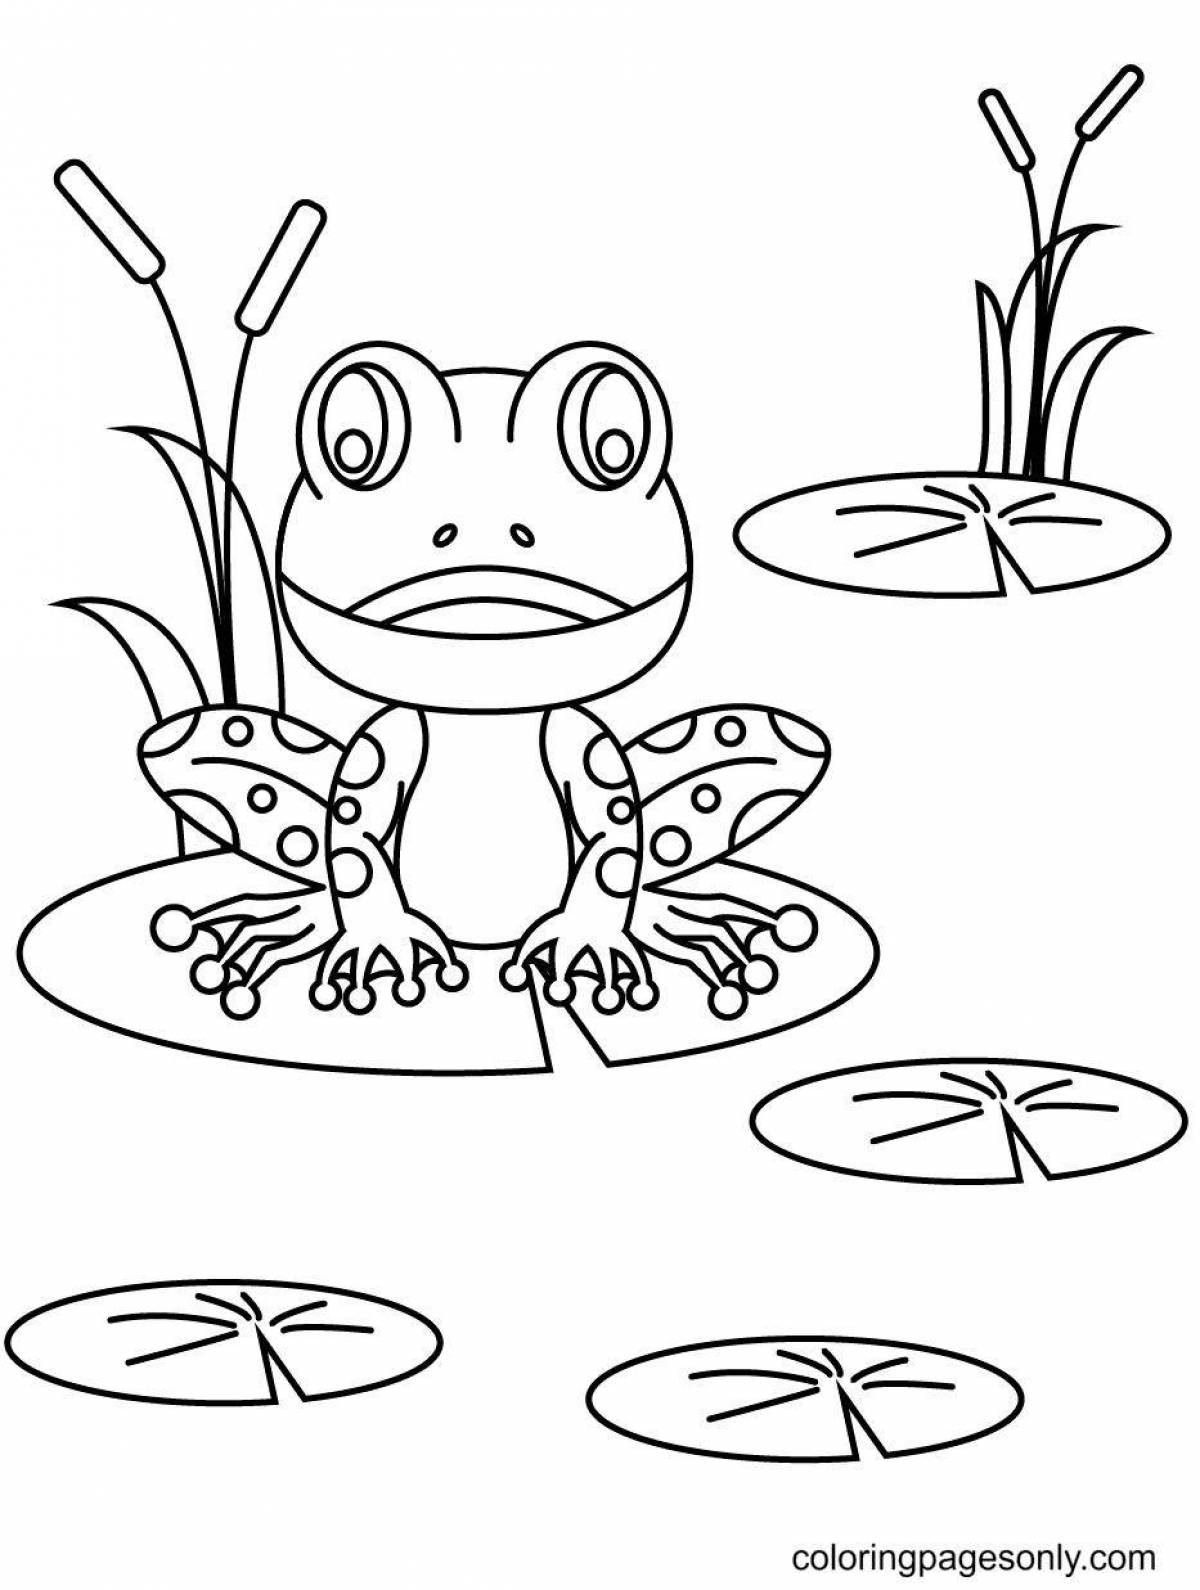 Coloring page elegant fly agaric frog